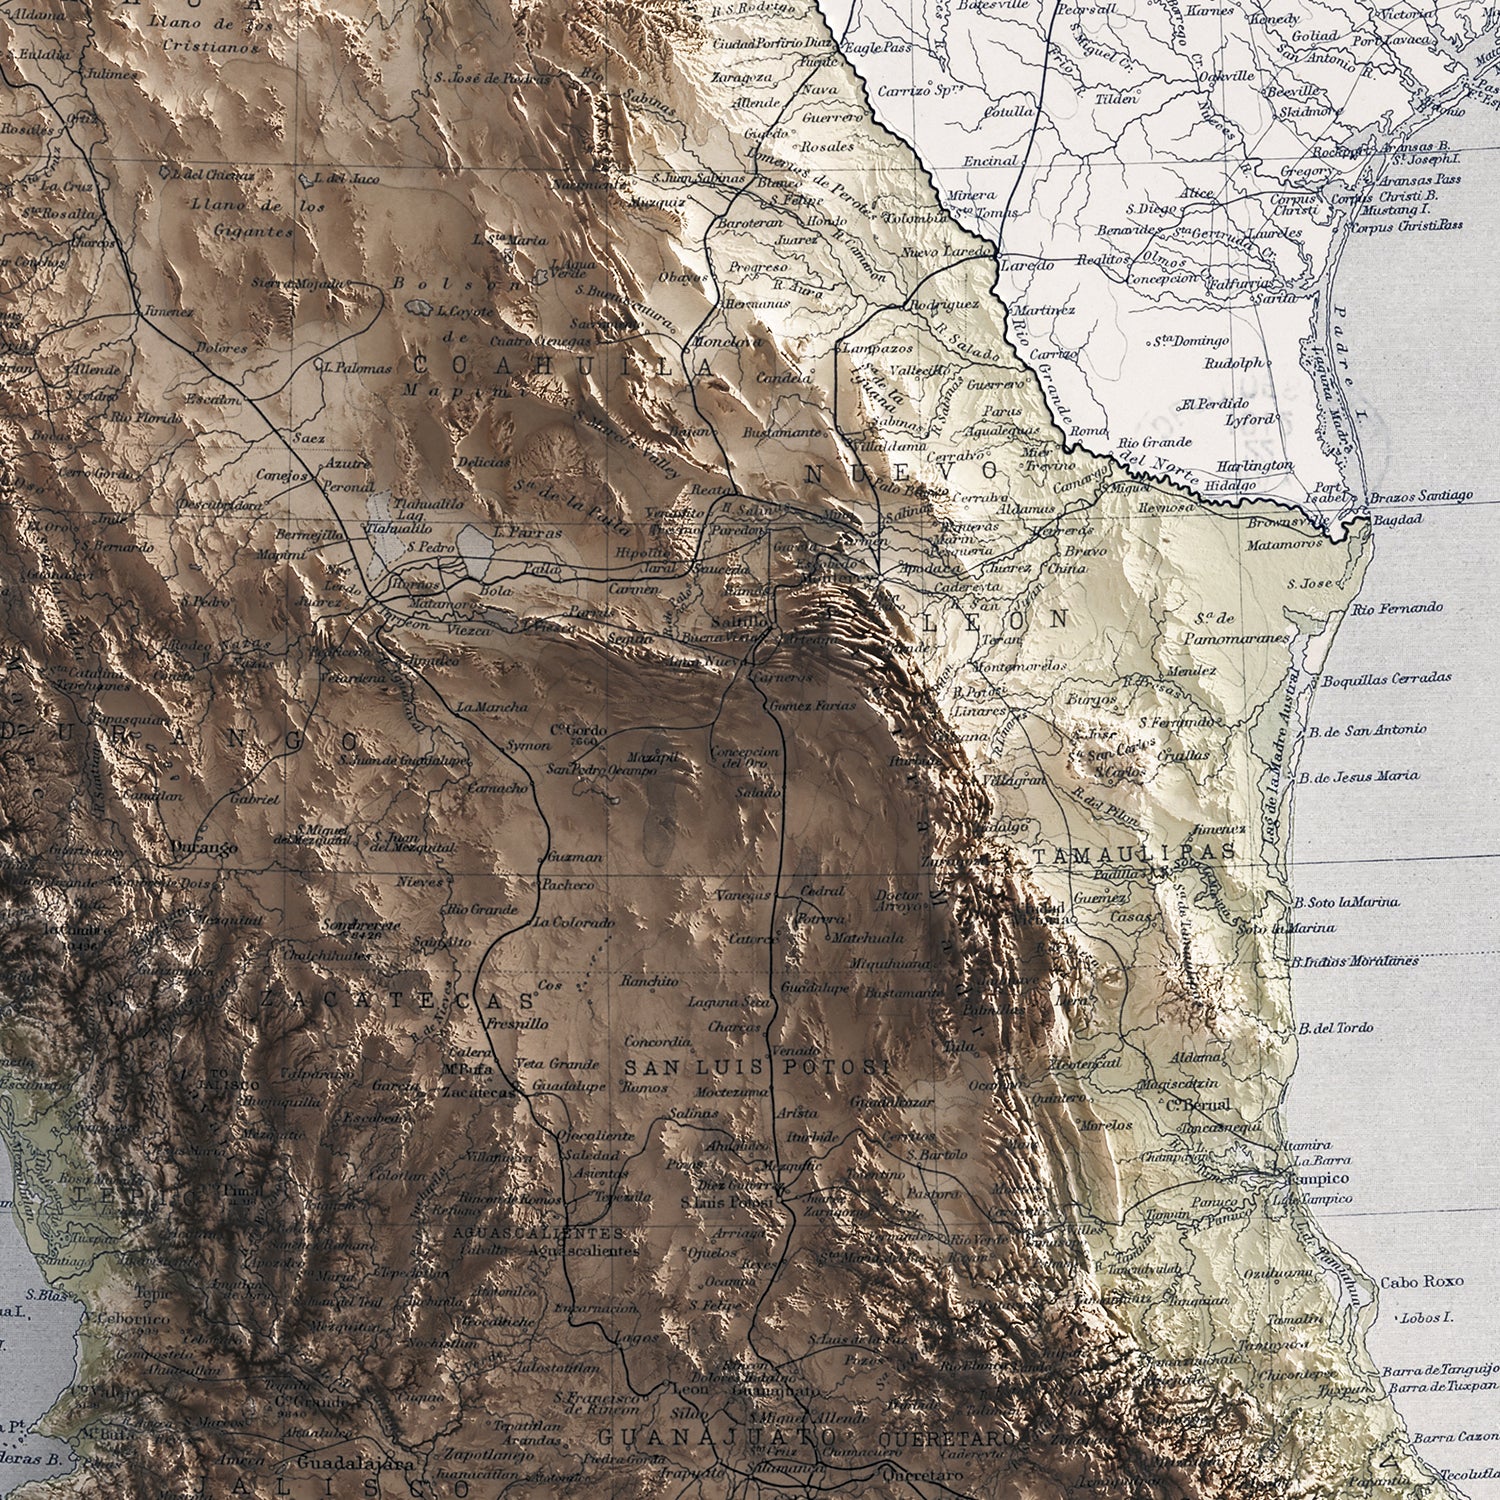 Mexico - Vintage Shaded Relief Map (1911)